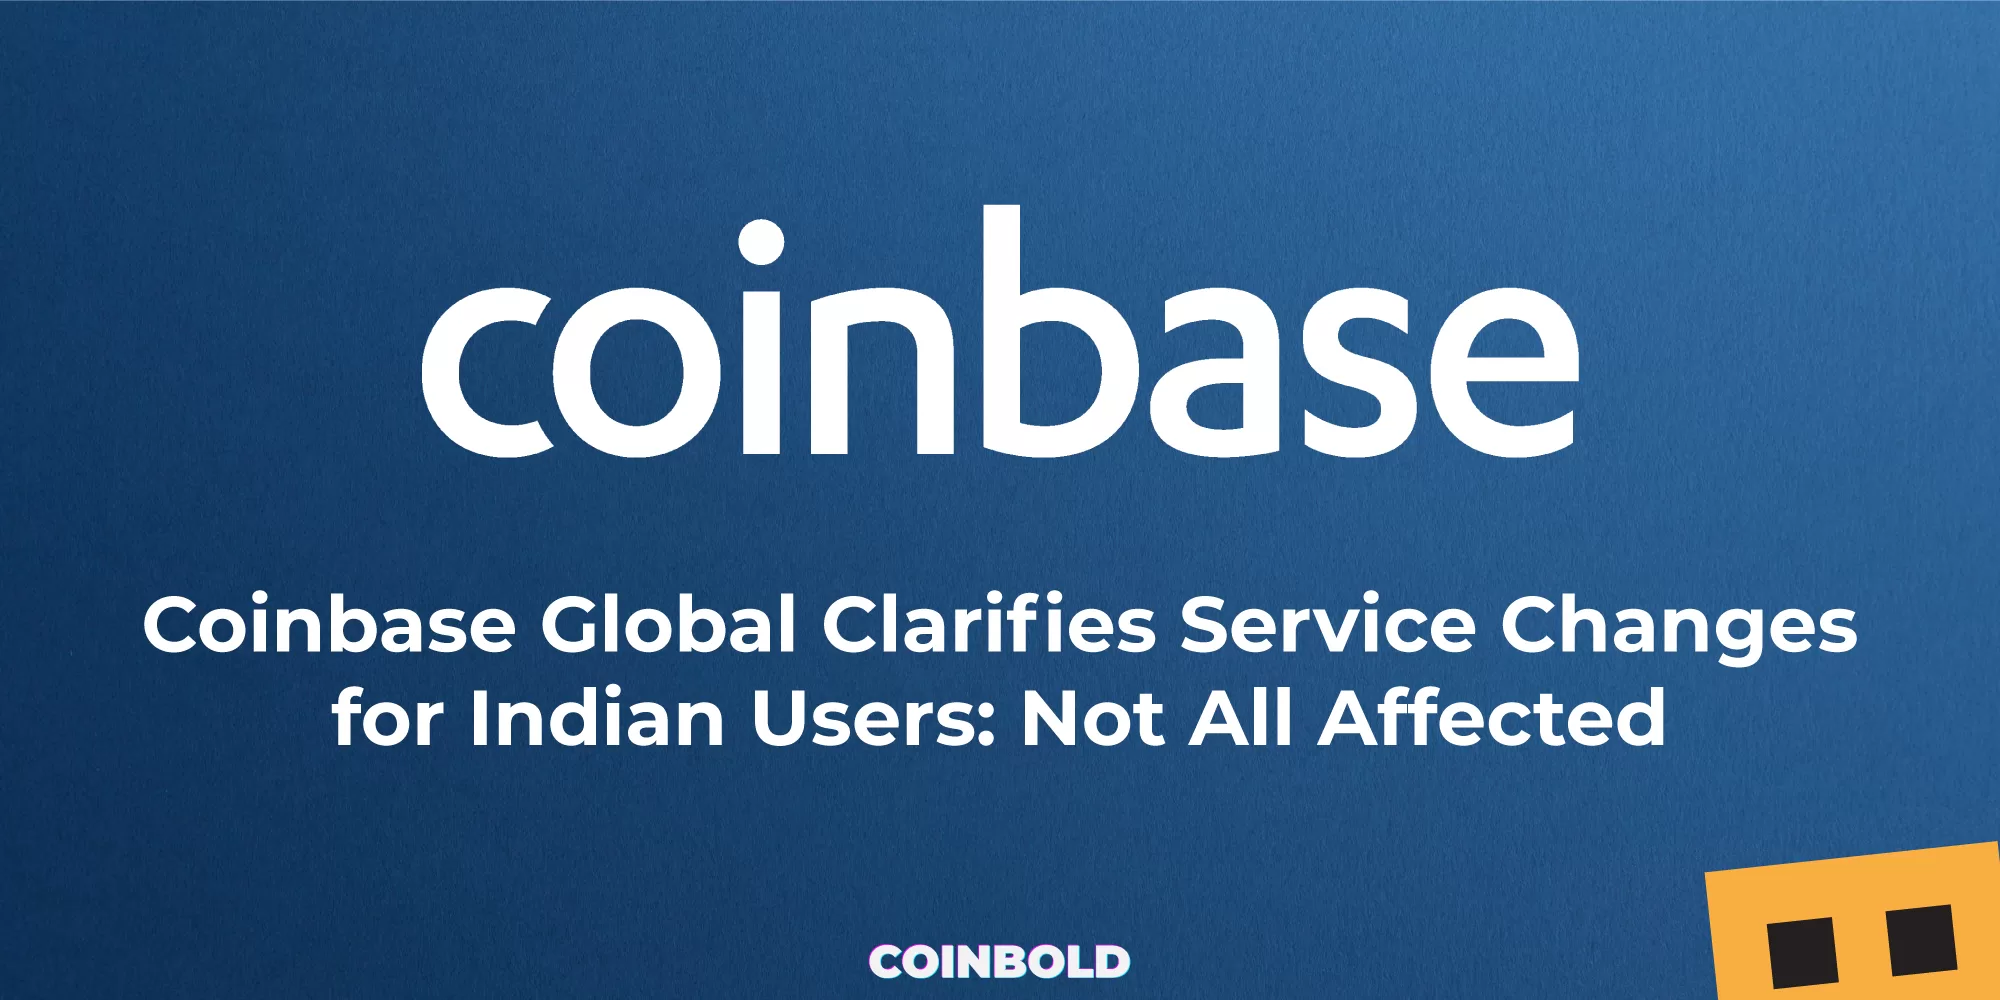 Coinbase Global Clarifies Service Changes for Indian Users Not All Affected